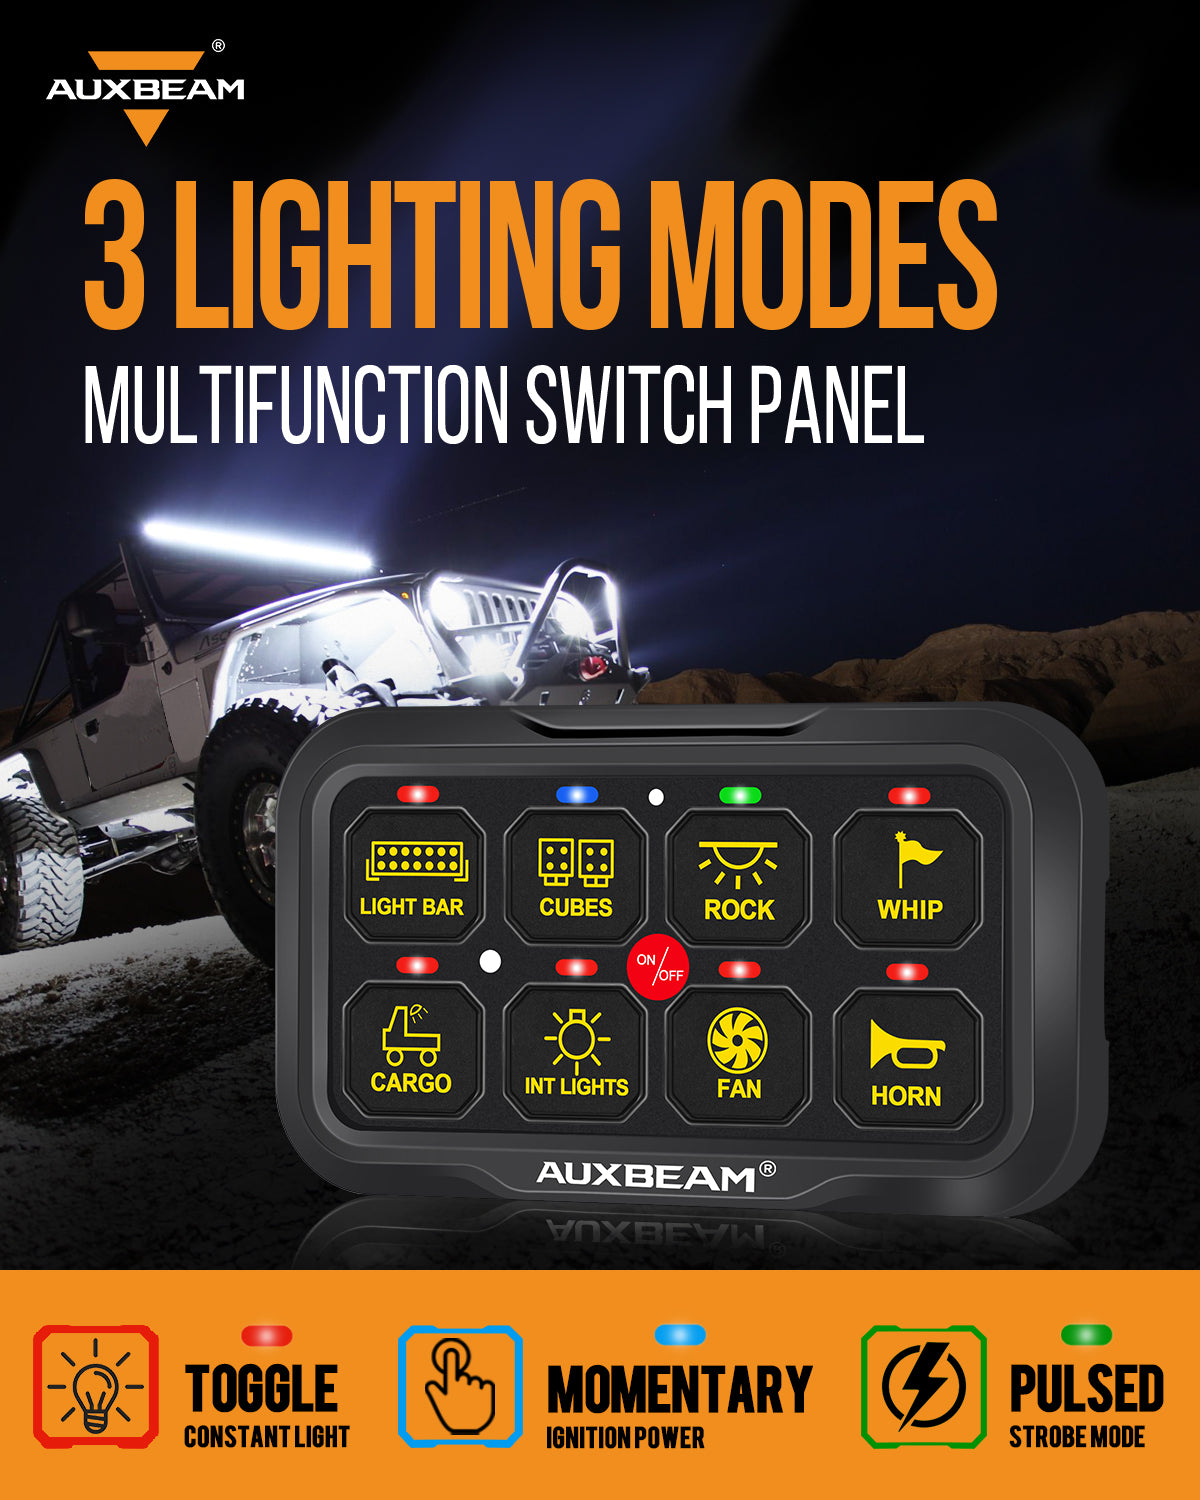 Auxbeam Gang Switch Panel for RVs and Campers, RA80 X2 Series